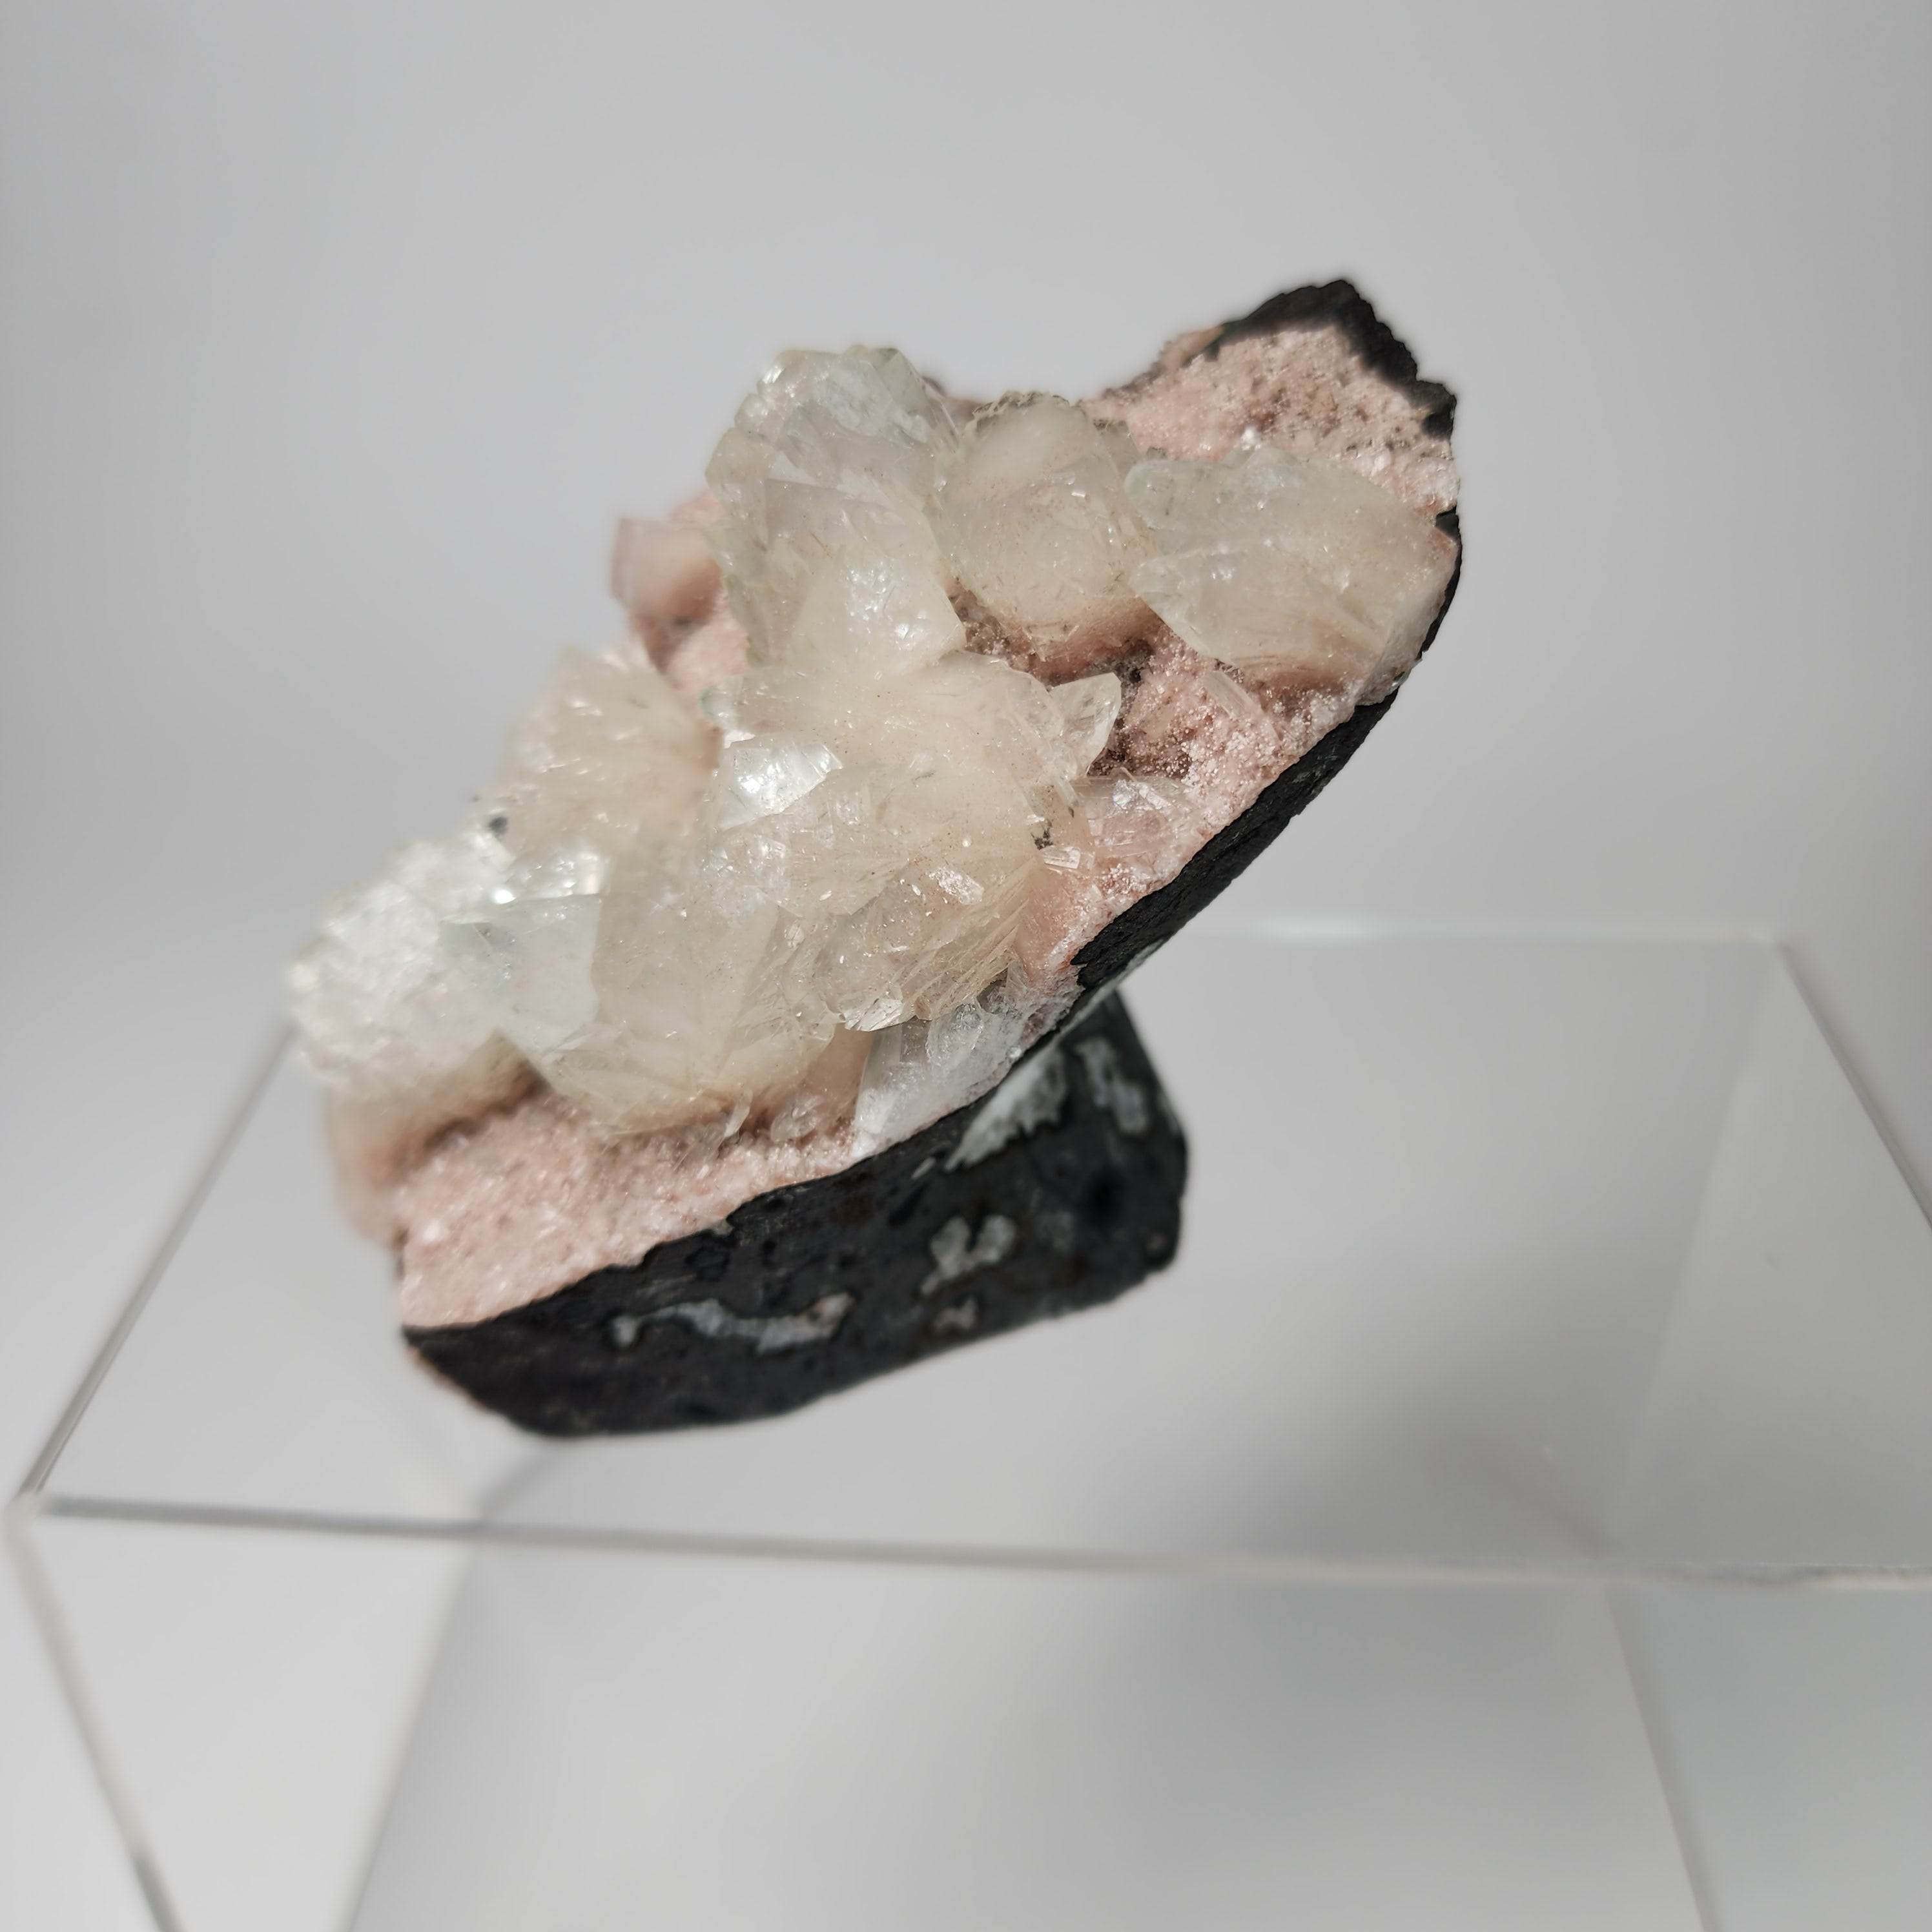 Pink Chalcedony with Disco Ball Formation Apophyllite - Specimen #2 - from Pune District, Maharashtra, India